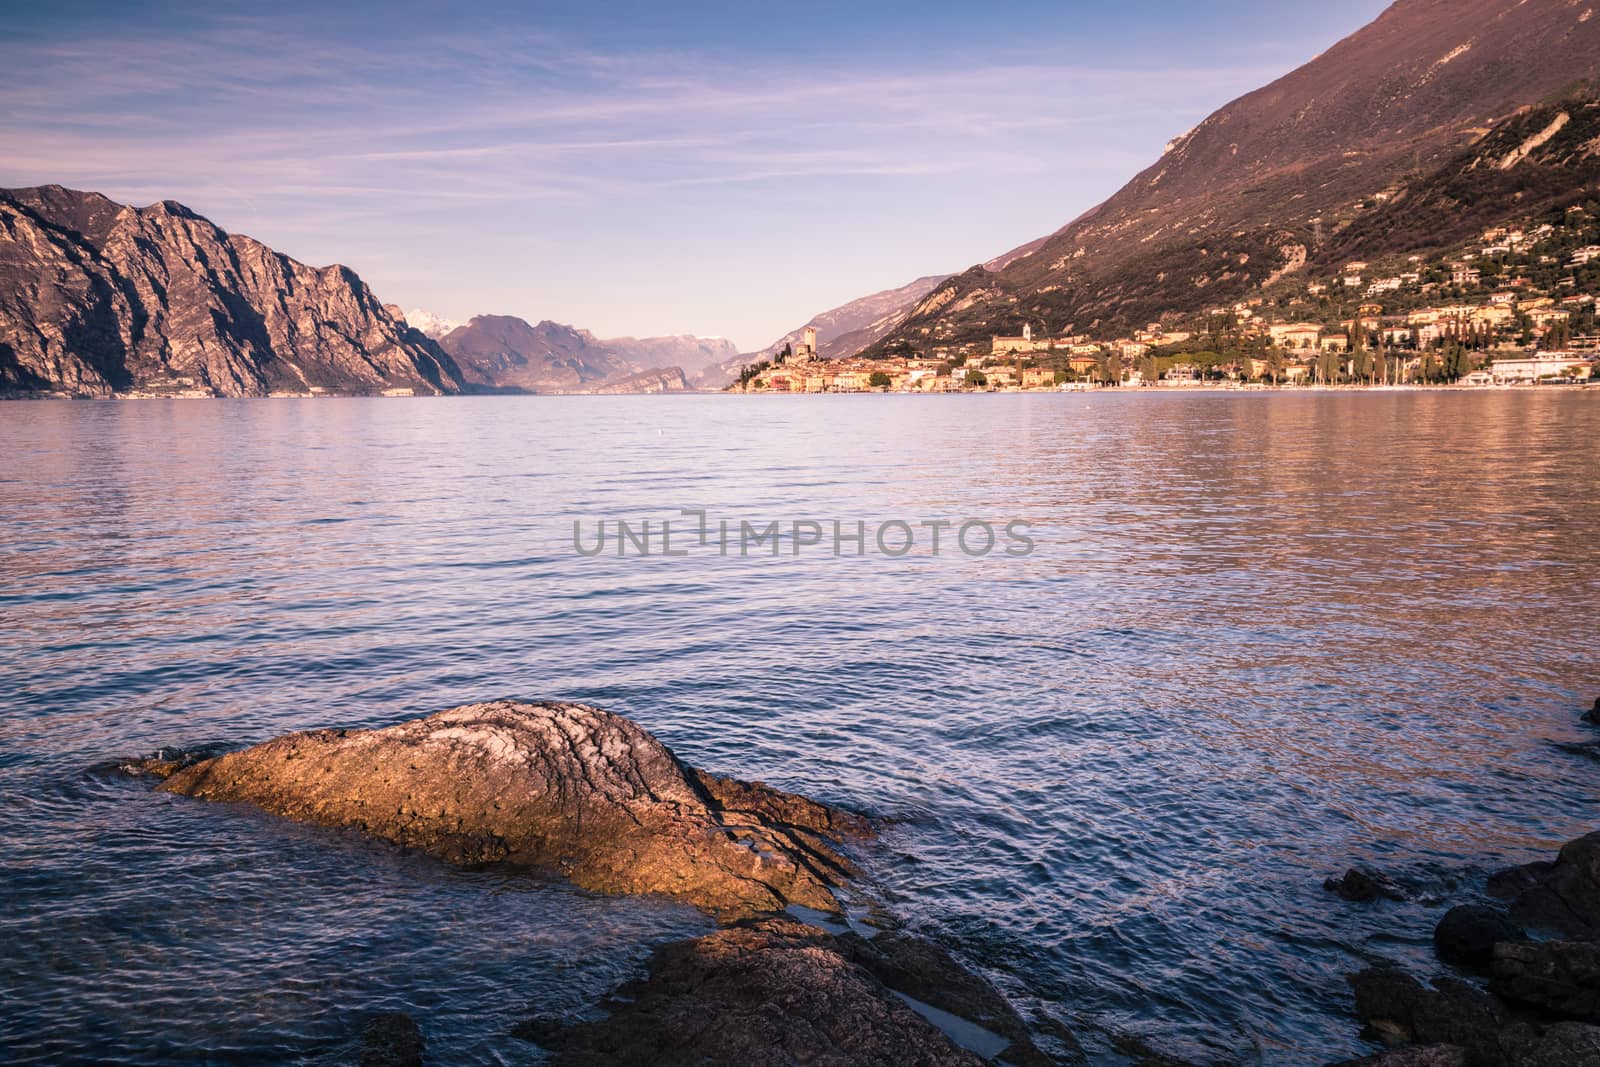 Panorama of Lake Garda (Italy) near the town of Malcesine called "the pearl of the lake".